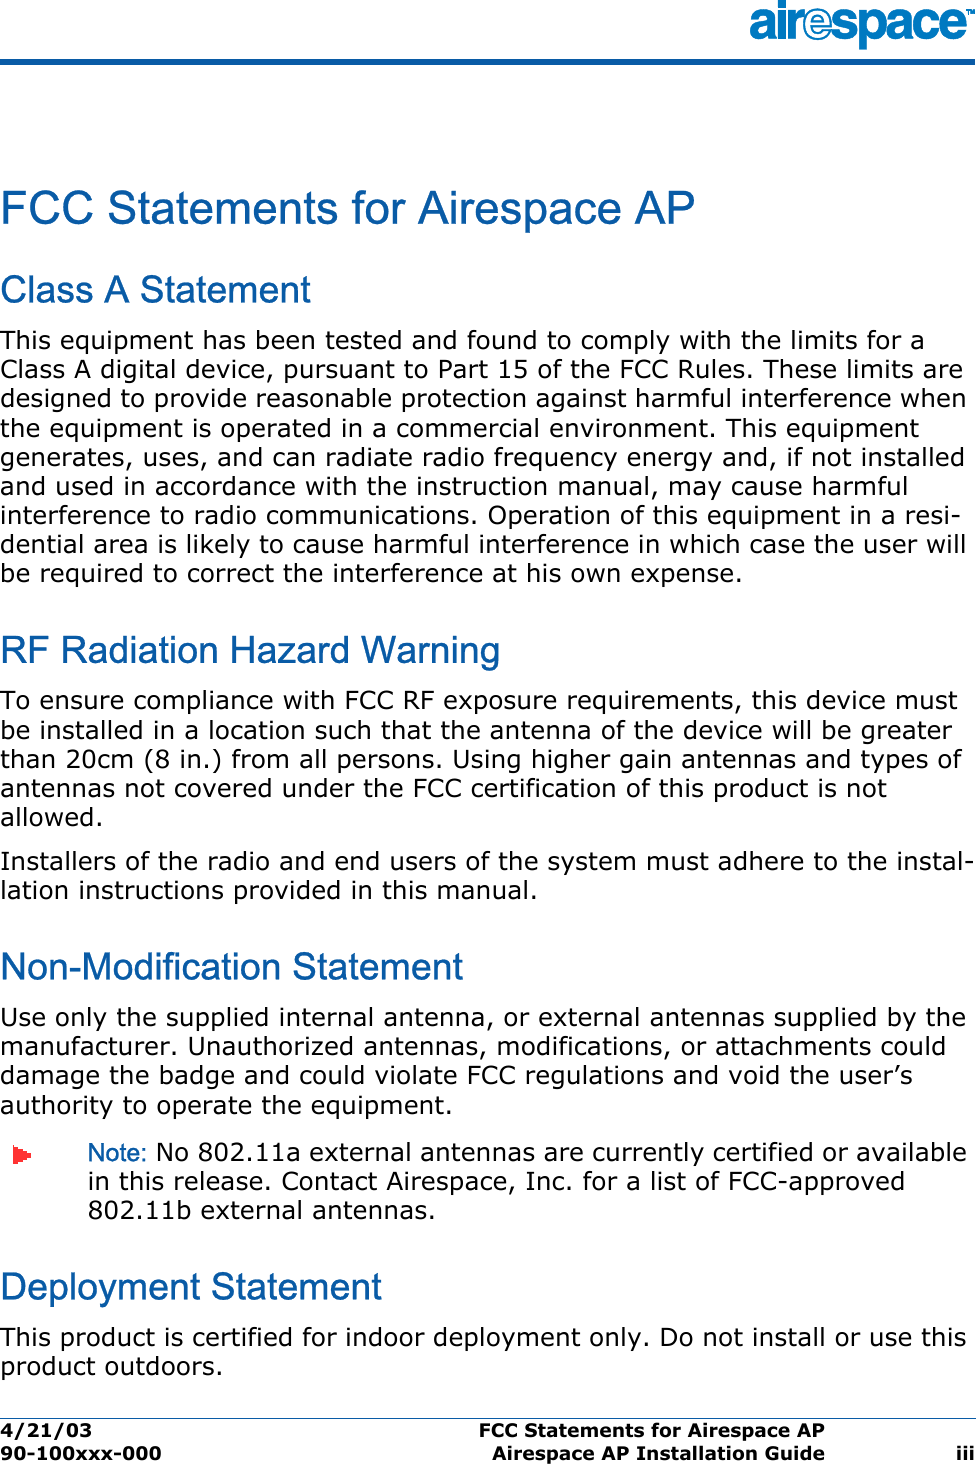 4/21/03 FCC Statements for Airespace AP  90-100xxx-000 Airespace AP Installation Guide iiiFCC Statements for Airespace APFCC Statements for Airespace APClass A StatementThis equipment has been tested and found to comply with the limits for a Class A digital device, pursuant to Part 15 of the FCC Rules. These limits are designed to provide reasonable protection against harmful interference when the equipment is operated in a commercial environment. This equipment generates, uses, and can radiate radio frequency energy and, if not installed and used in accordance with the instruction manual, may cause harmful interference to radio communications. Operation of this equipment in a resi-dential area is likely to cause harmful interference in which case the user will be required to correct the interference at his own expense.RF Radiation Hazard WarningTo ensure compliance with FCC RF exposure requirements, this device must be installed in a location such that the antenna of the device will be greater than 20cm (8 in.) from all persons. Using higher gain antennas and types of antennas not covered under the FCC certification of this product is not allowed. Installers of the radio and end users of the system must adhere to the instal-lation instructions provided in this manual.Non-Modification StatementUse only the supplied internal antenna, or external antennas supplied by the manufacturer. Unauthorized antennas, modifications, or attachments could damage the badge and could violate FCC regulations and void the user’s authority to operate the equipment.Note: No 802.11a external antennas are currently certified or available in this release. Contact Airespace, Inc. for a list of FCC-approved 802.11b external antennas. Deployment StatementThis product is certified for indoor deployment only. Do not install or use this product outdoors.